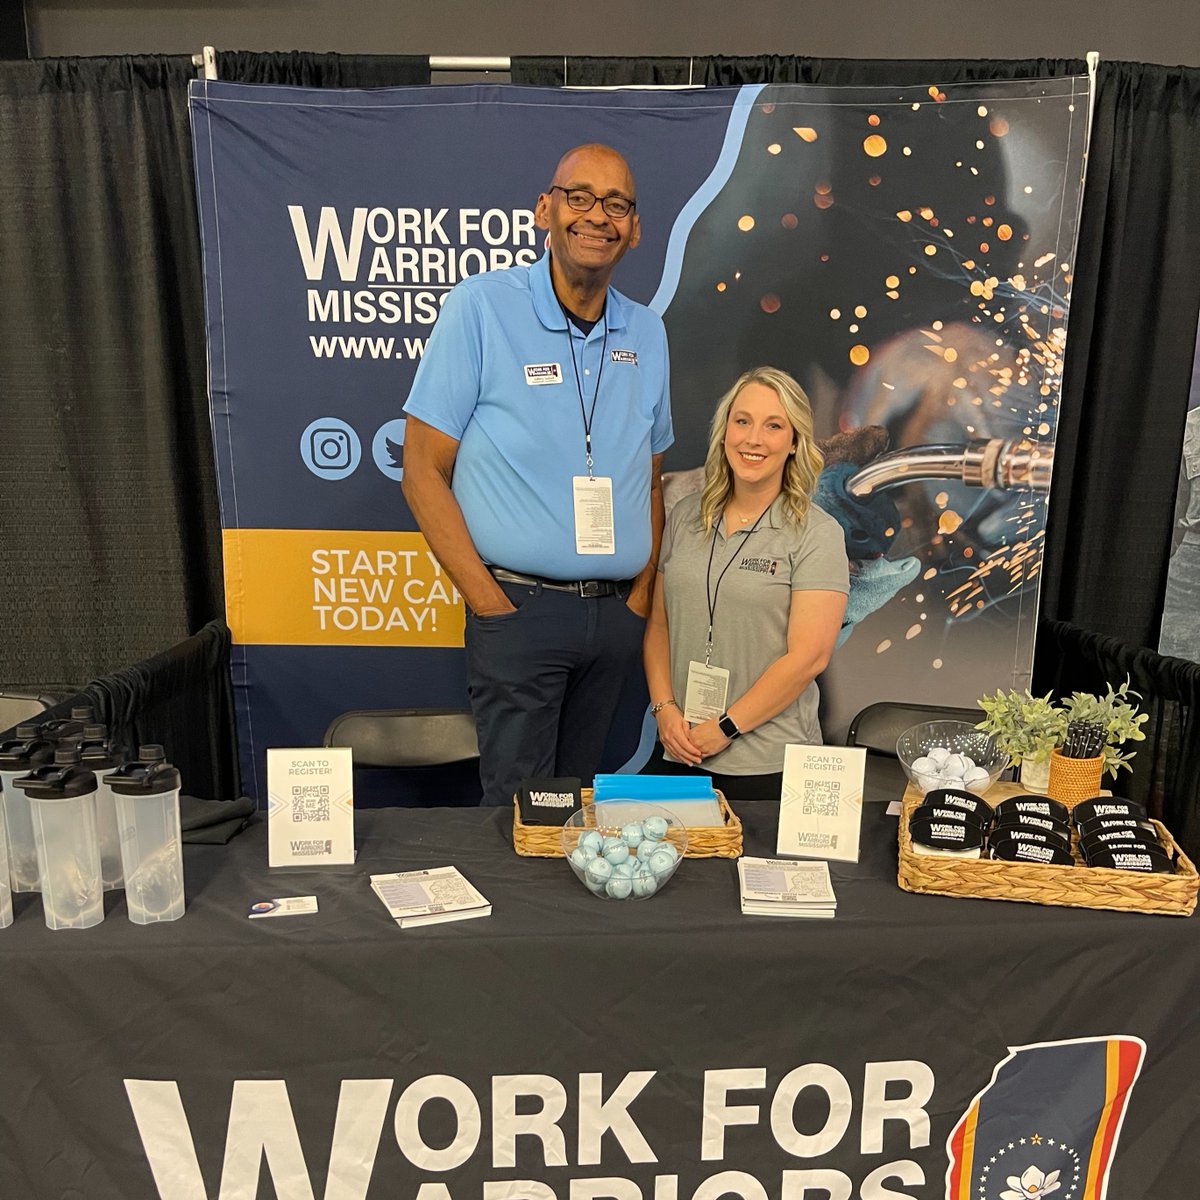 The #wfwms team was on the road last weekend! We were connecting with the #Hattiesburg community at the DAV Vet Fest, while other team members were attending the #ngams 2024 State Conference in #Biloxi. 

#Mississippi #WorkforWarriors #hiring #career #employment